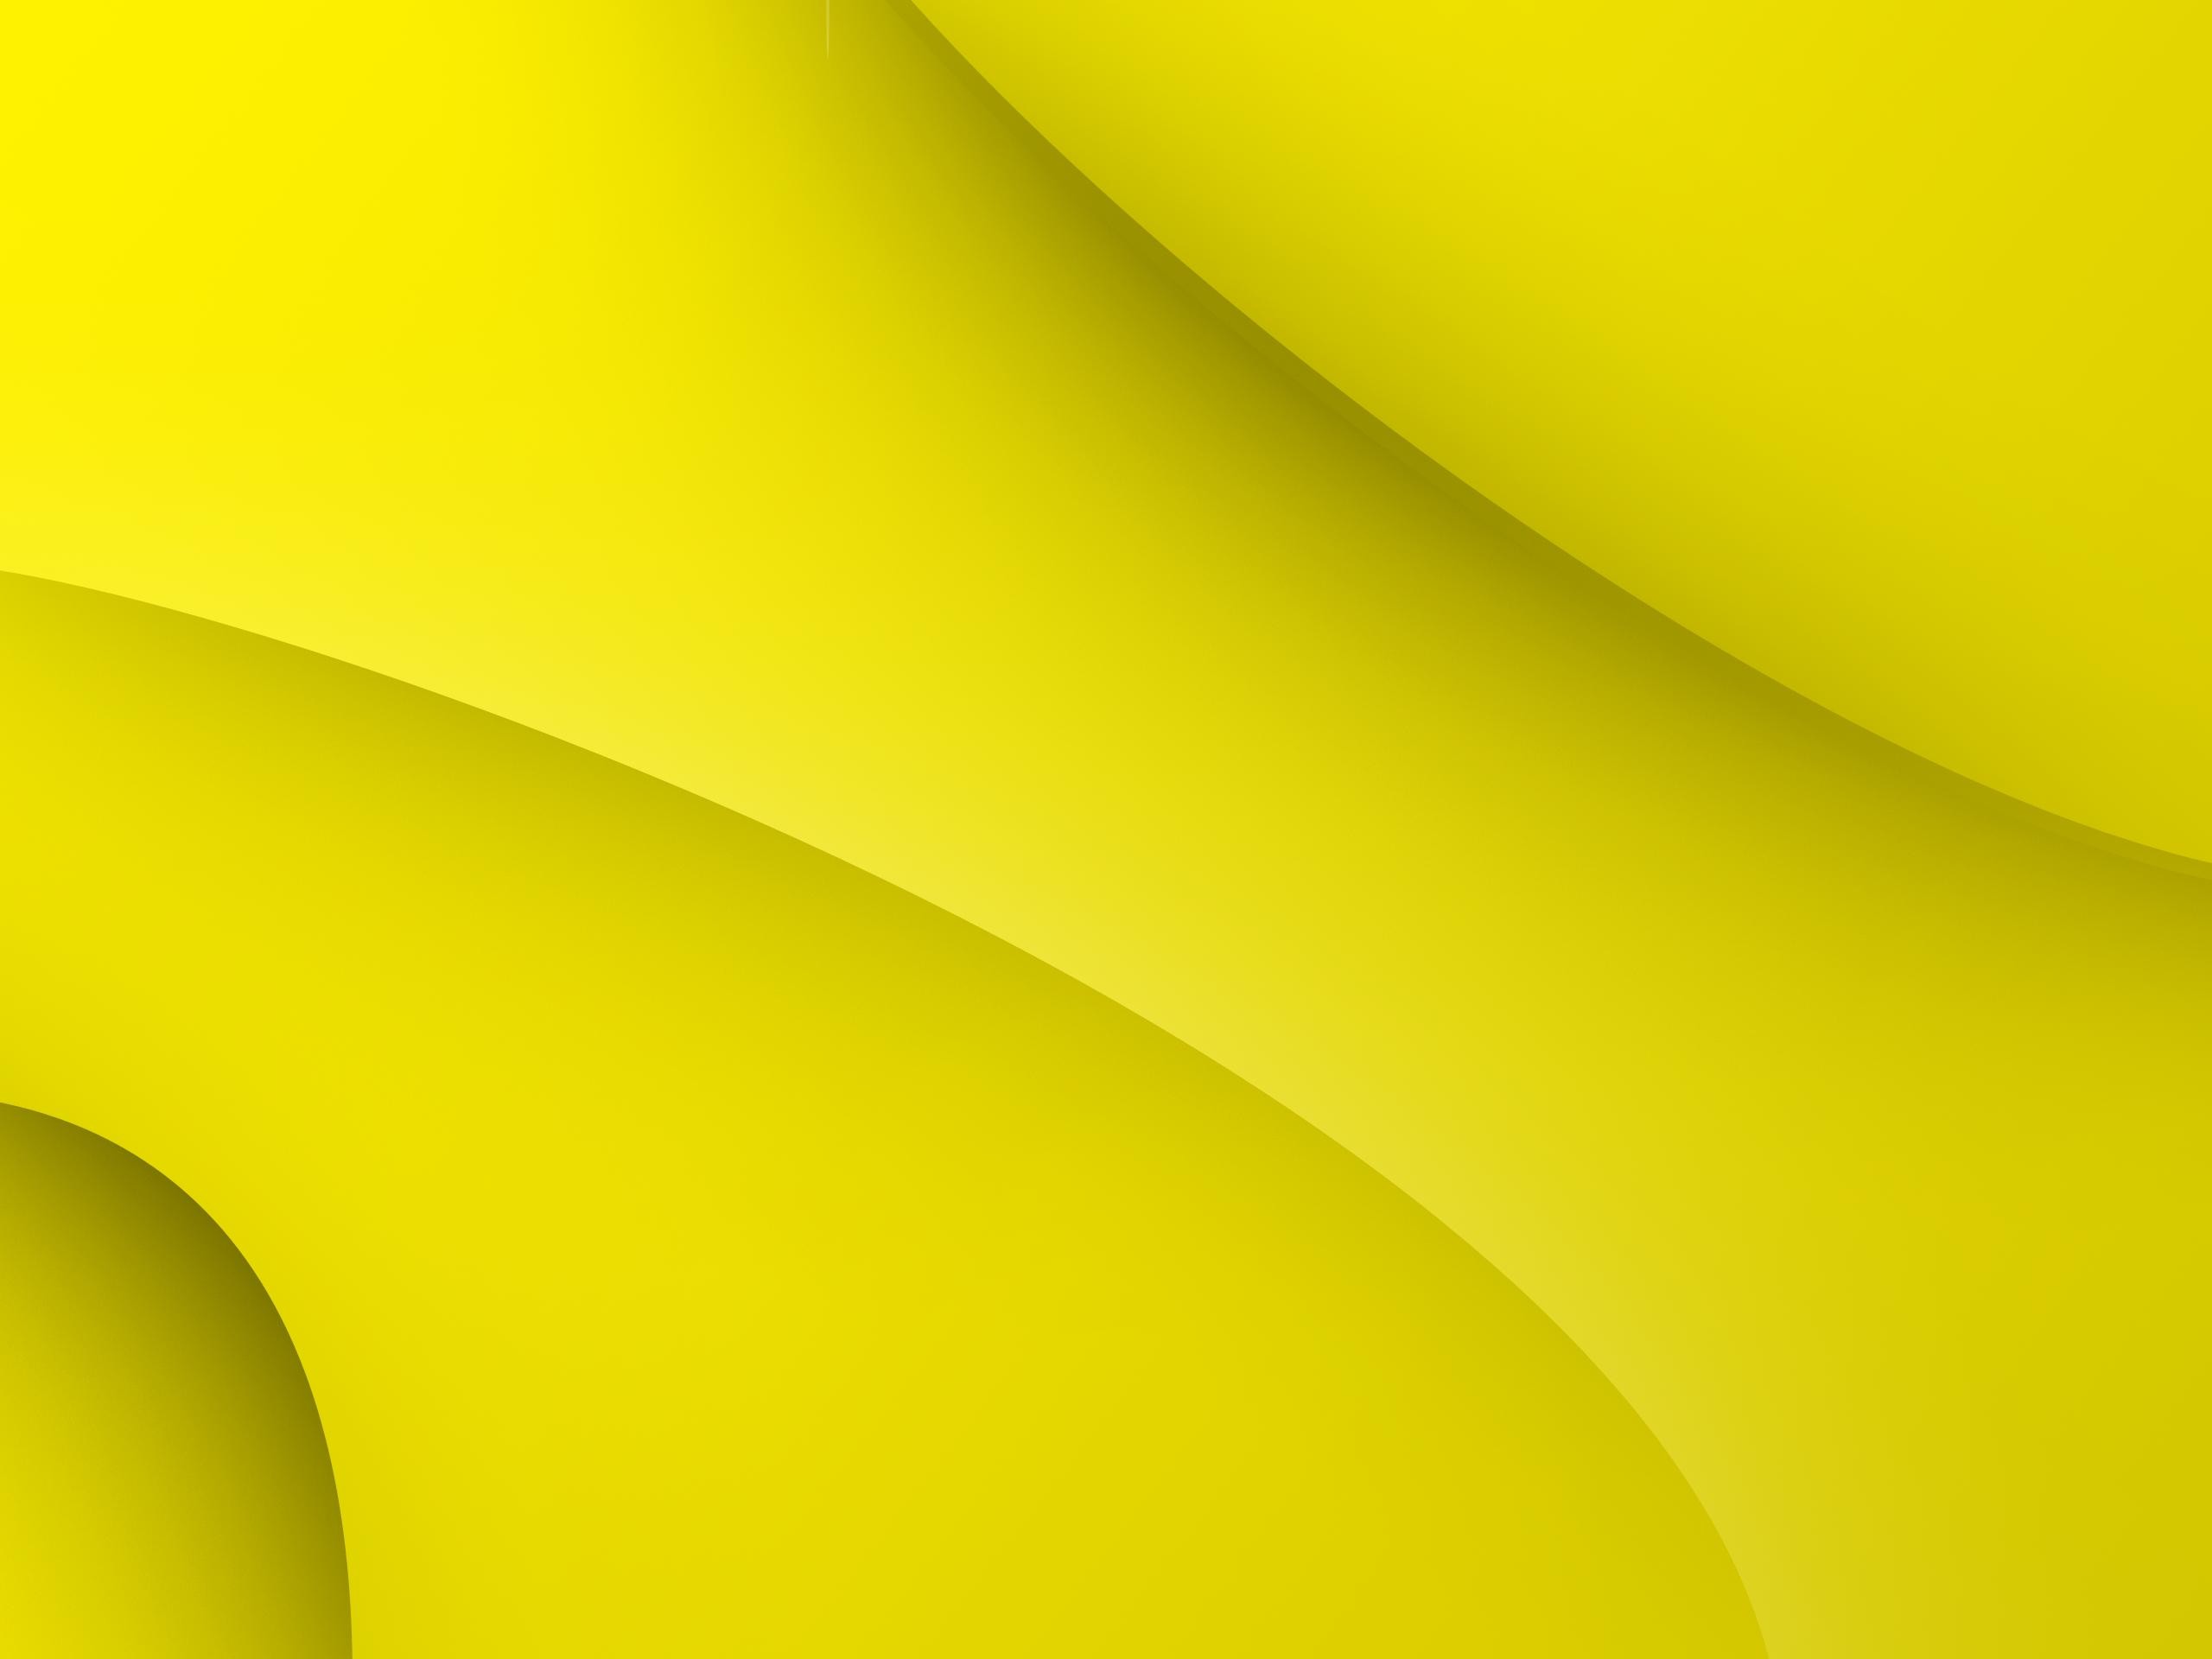 Yellow Aesthetic Wallpapers and Backgrounds image Free Download